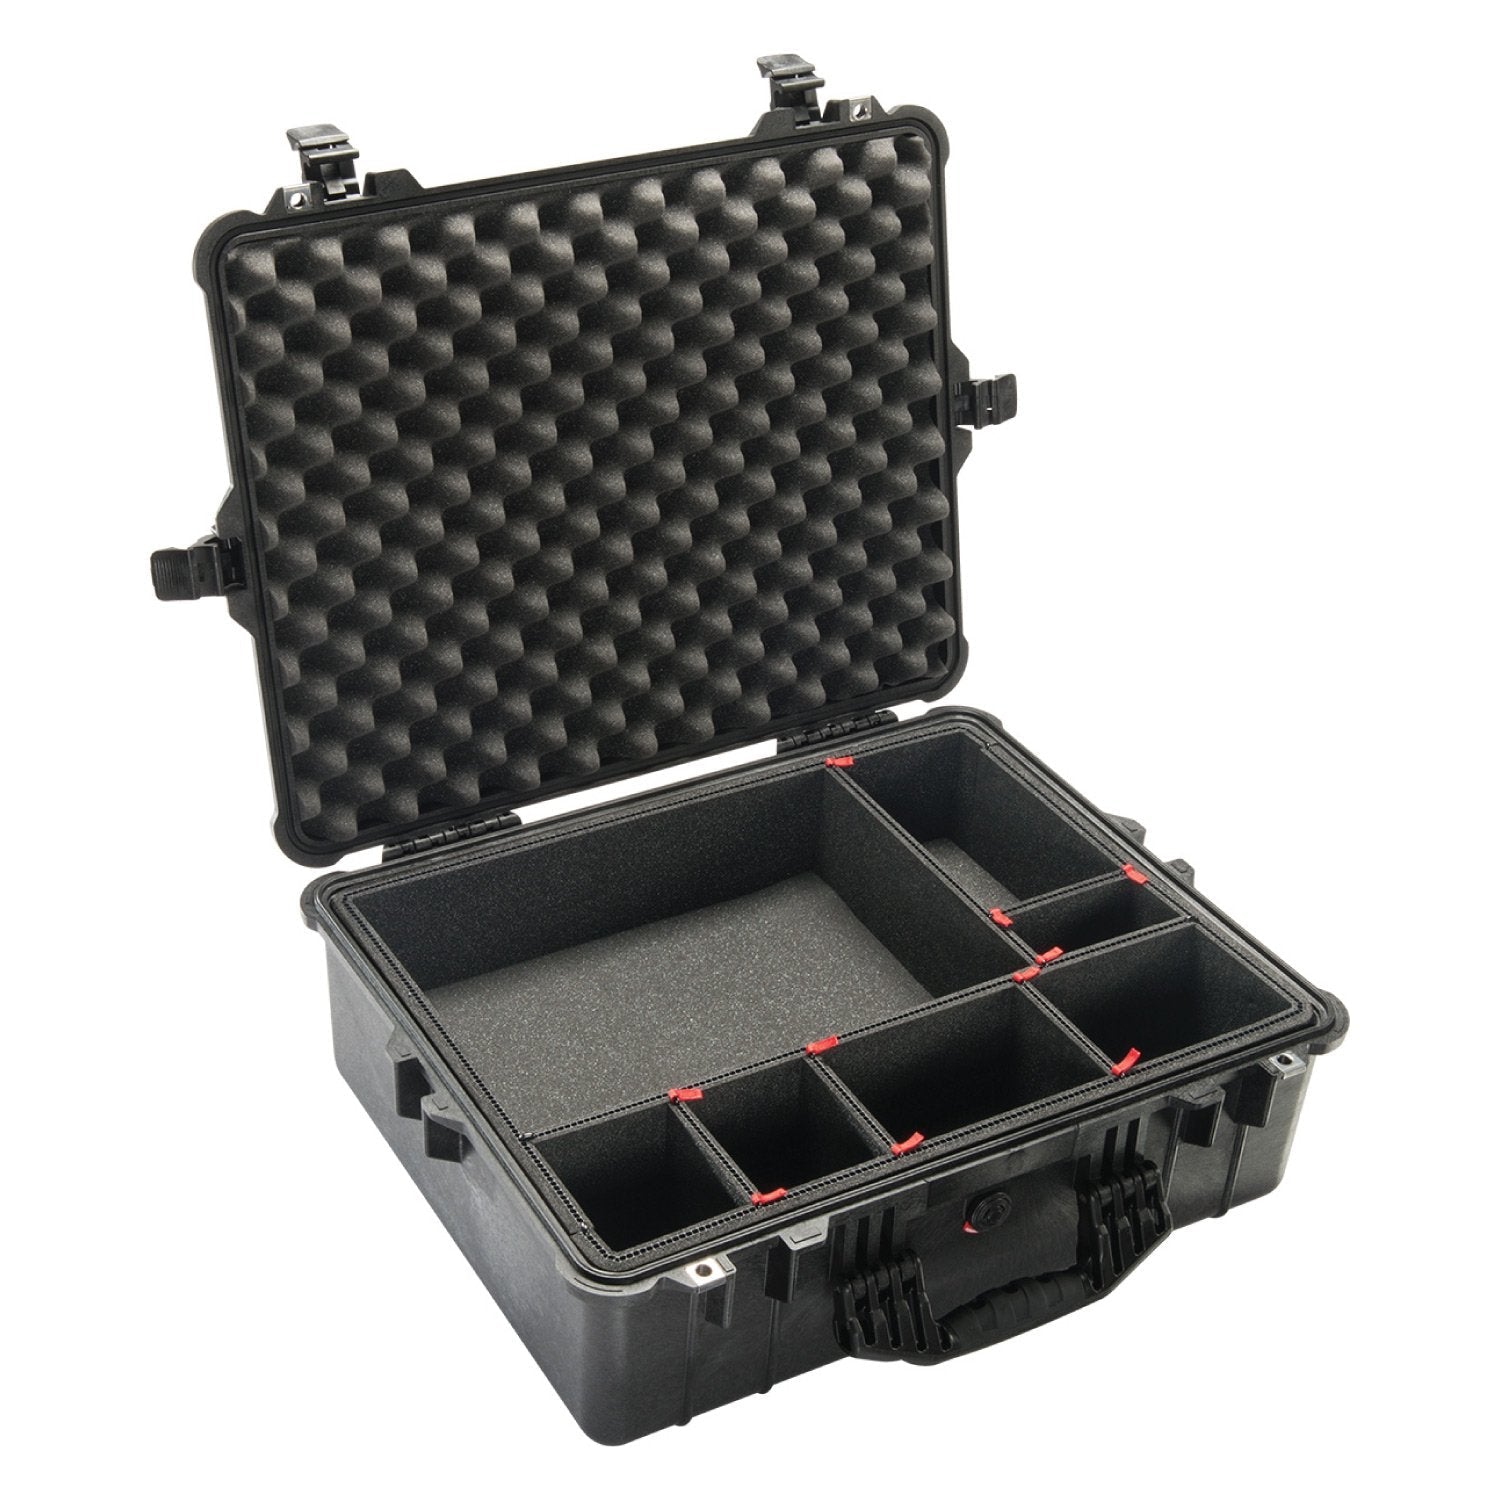 Pelican 1600 Classic Large Hard Case Black Cases Pelican Products With Foam Tactical Gear Supplier Tactical Distributors Australia